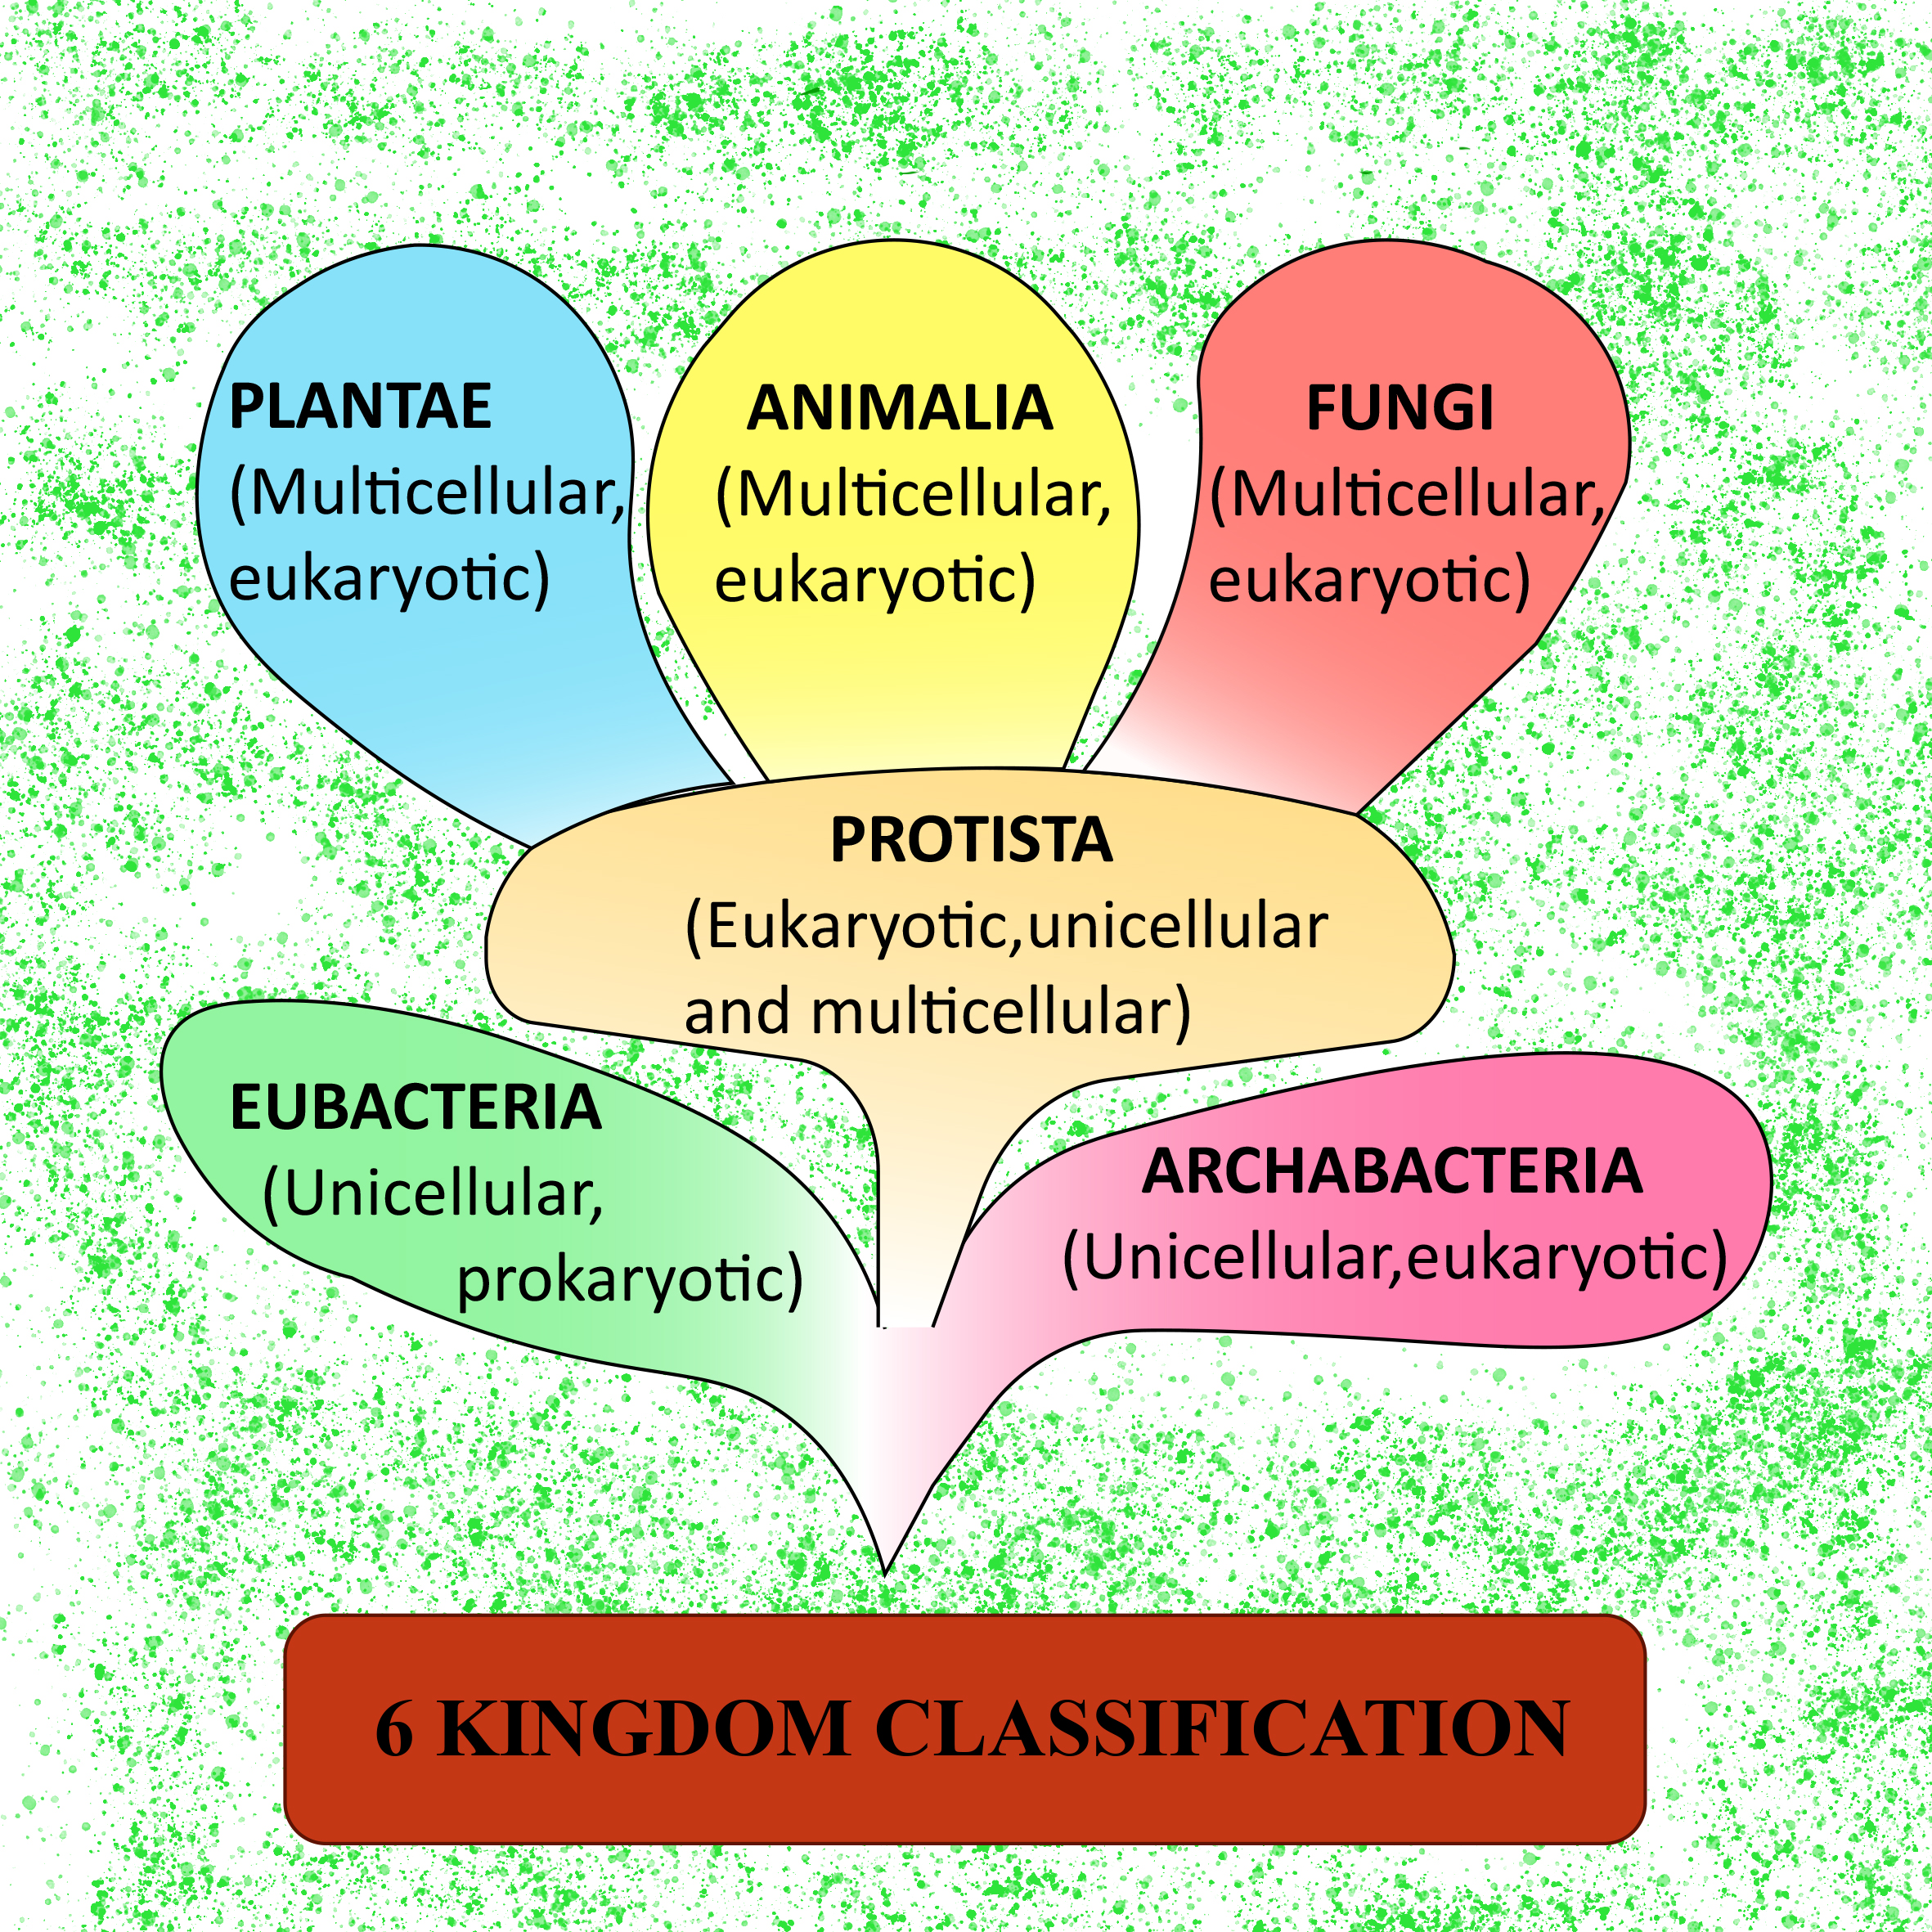 six-kingdom-classification-was-suggested-by-class-11-biology-cbse-riset